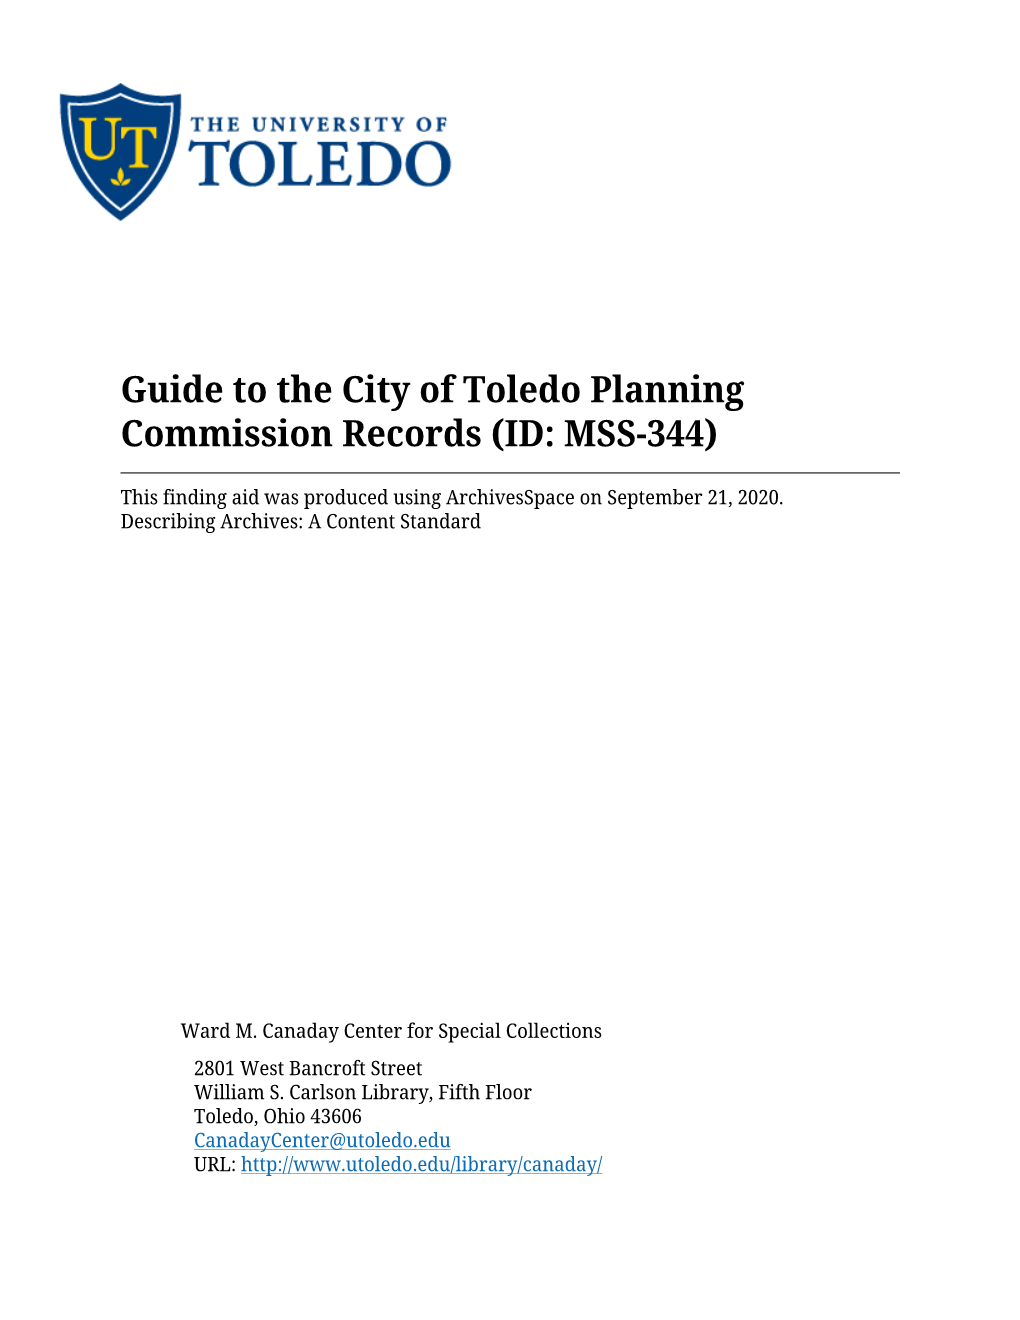 Guide to the City of Toledo Planning Commission Records (ID: MSS-344)